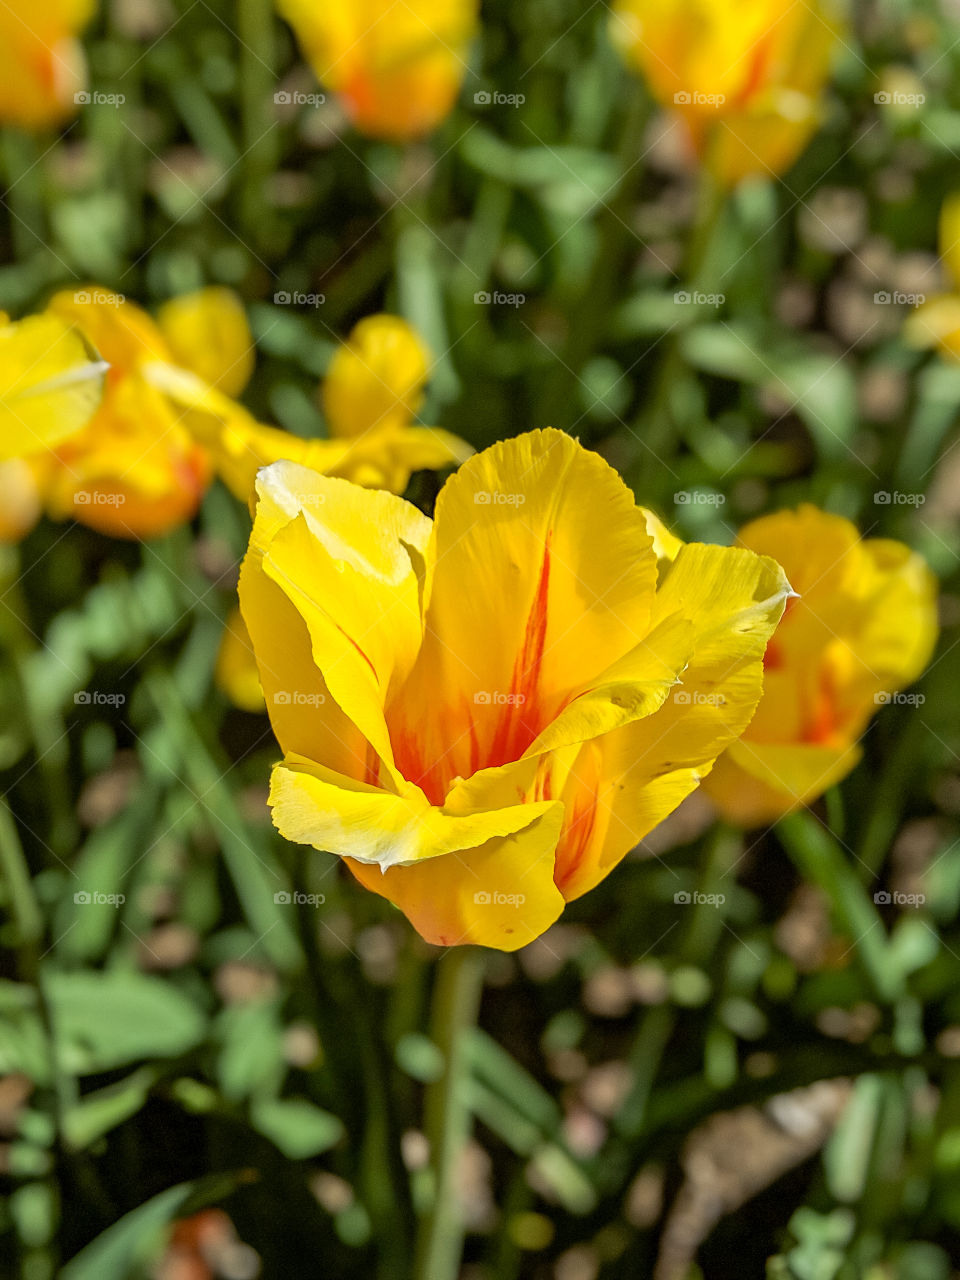 Vibrant Bright and Colorful Yellow Red Orange Tulip Flower Open Close Up